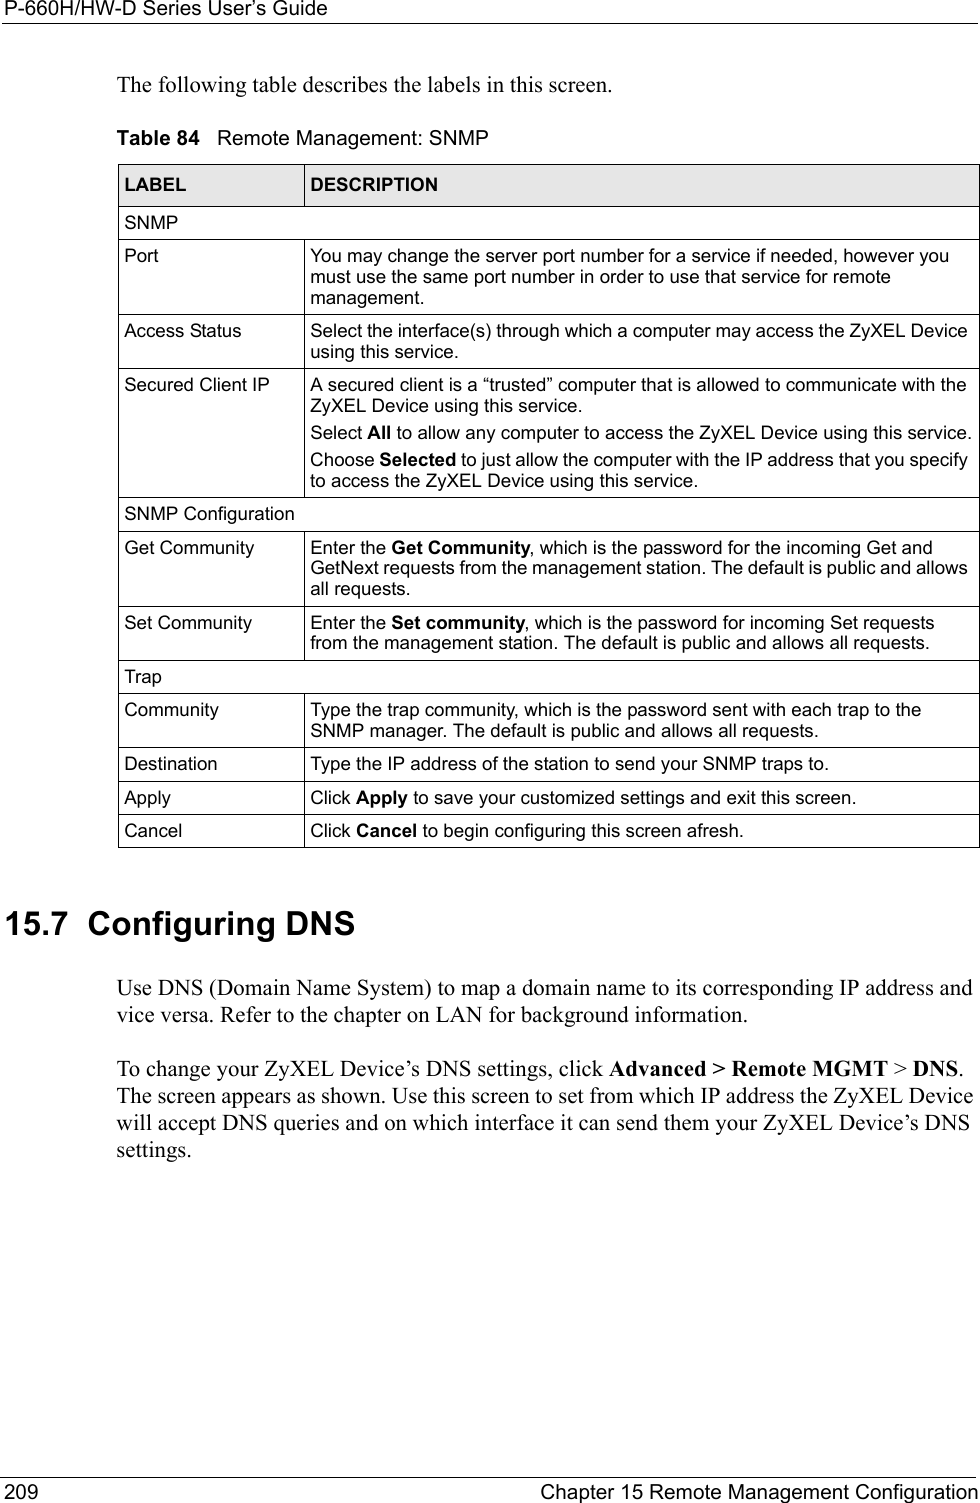 P-660H/HW-D Series User’s Guide209 Chapter 15 Remote Management ConfigurationThe following table describes the labels in this screen.15.7  Configuring DNS  Use DNS (Domain Name System) to map a domain name to its corresponding IP address and vice versa. Refer to the chapter on LAN for background information. To change your ZyXEL Device’s DNS settings, click Advanced &gt; Remote MGMT &gt; DNS. The screen appears as shown. Use this screen to set from which IP address the ZyXEL Device will accept DNS queries and on which interface it can send them your ZyXEL Device’s DNS settings.Table 84   Remote Management: SNMPLABEL DESCRIPTIONSNMPPort You may change the server port number for a service if needed, however you must use the same port number in order to use that service for remote management.Access Status Select the interface(s) through which a computer may access the ZyXEL Device using this service.Secured Client IP A secured client is a “trusted” computer that is allowed to communicate with the ZyXEL Device using this service. Select All to allow any computer to access the ZyXEL Device using this service.Choose Selected to just allow the computer with the IP address that you specify to access the ZyXEL Device using this service.SNMP ConfigurationGet Community Enter the Get Community, which is the password for the incoming Get and GetNext requests from the management station. The default is public and allows all requests.Set Community Enter the Set community, which is the password for incoming Set requests from the management station. The default is public and allows all requests.TrapCommunity Type the trap community, which is the password sent with each trap to the SNMP manager. The default is public and allows all requests.Destination Type the IP address of the station to send your SNMP traps to.Apply Click Apply to save your customized settings and exit this screen. Cancel Click Cancel to begin configuring this screen afresh.